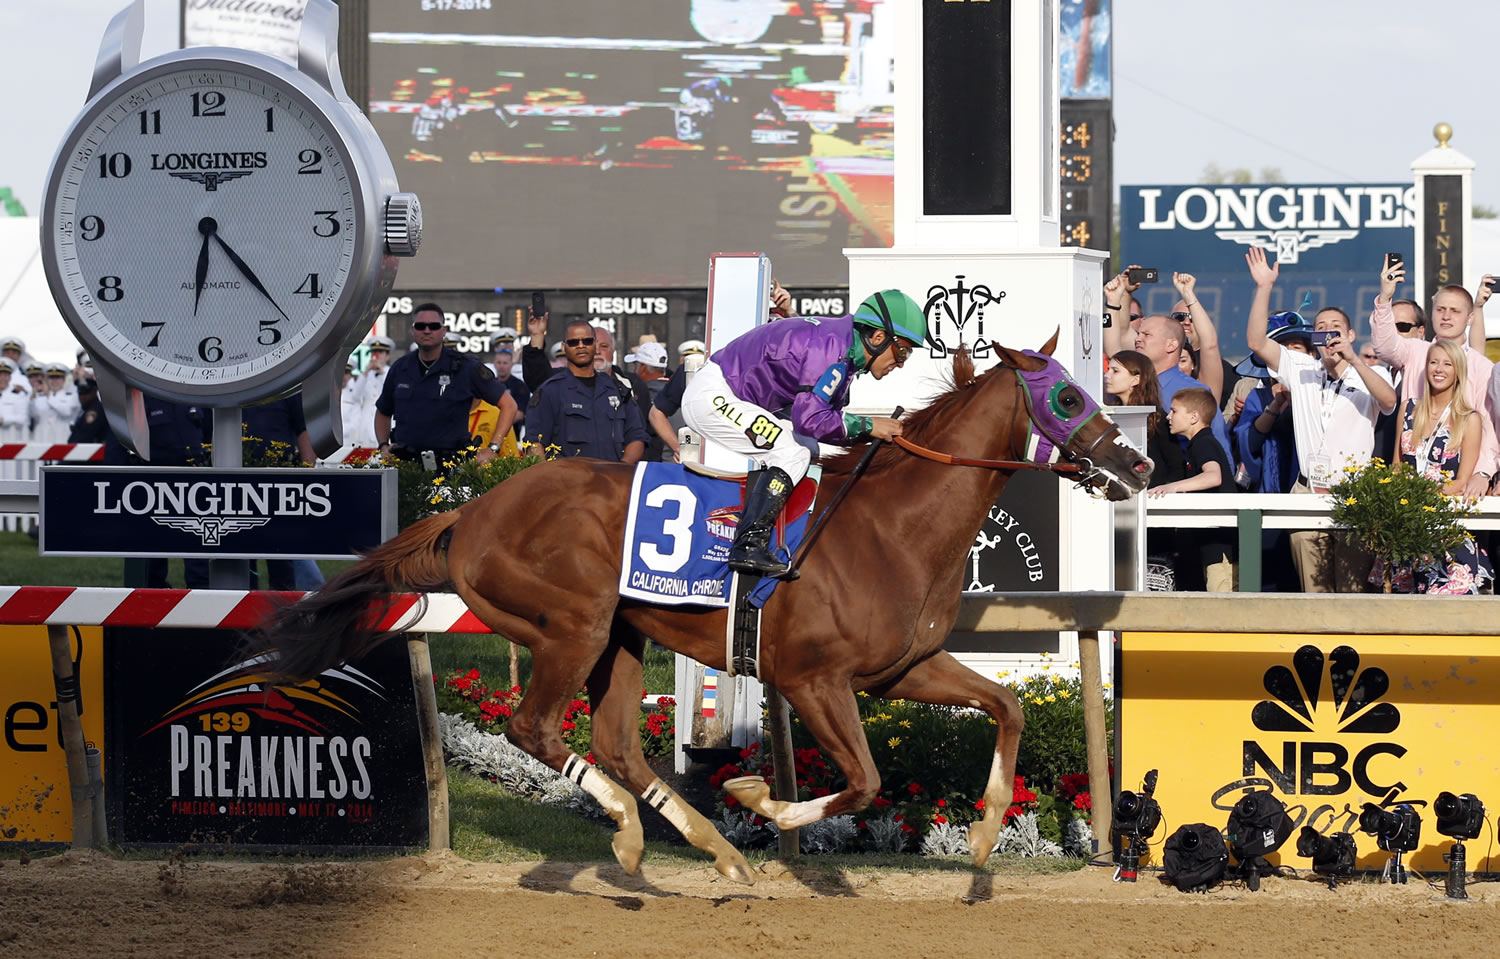 California Chrome, ridden by jockey Victor Espinoza, wins the 139th Preakness Stakes horse race at Pimlico Race Course, Saturday, May 17, 2014, in Baltimore.